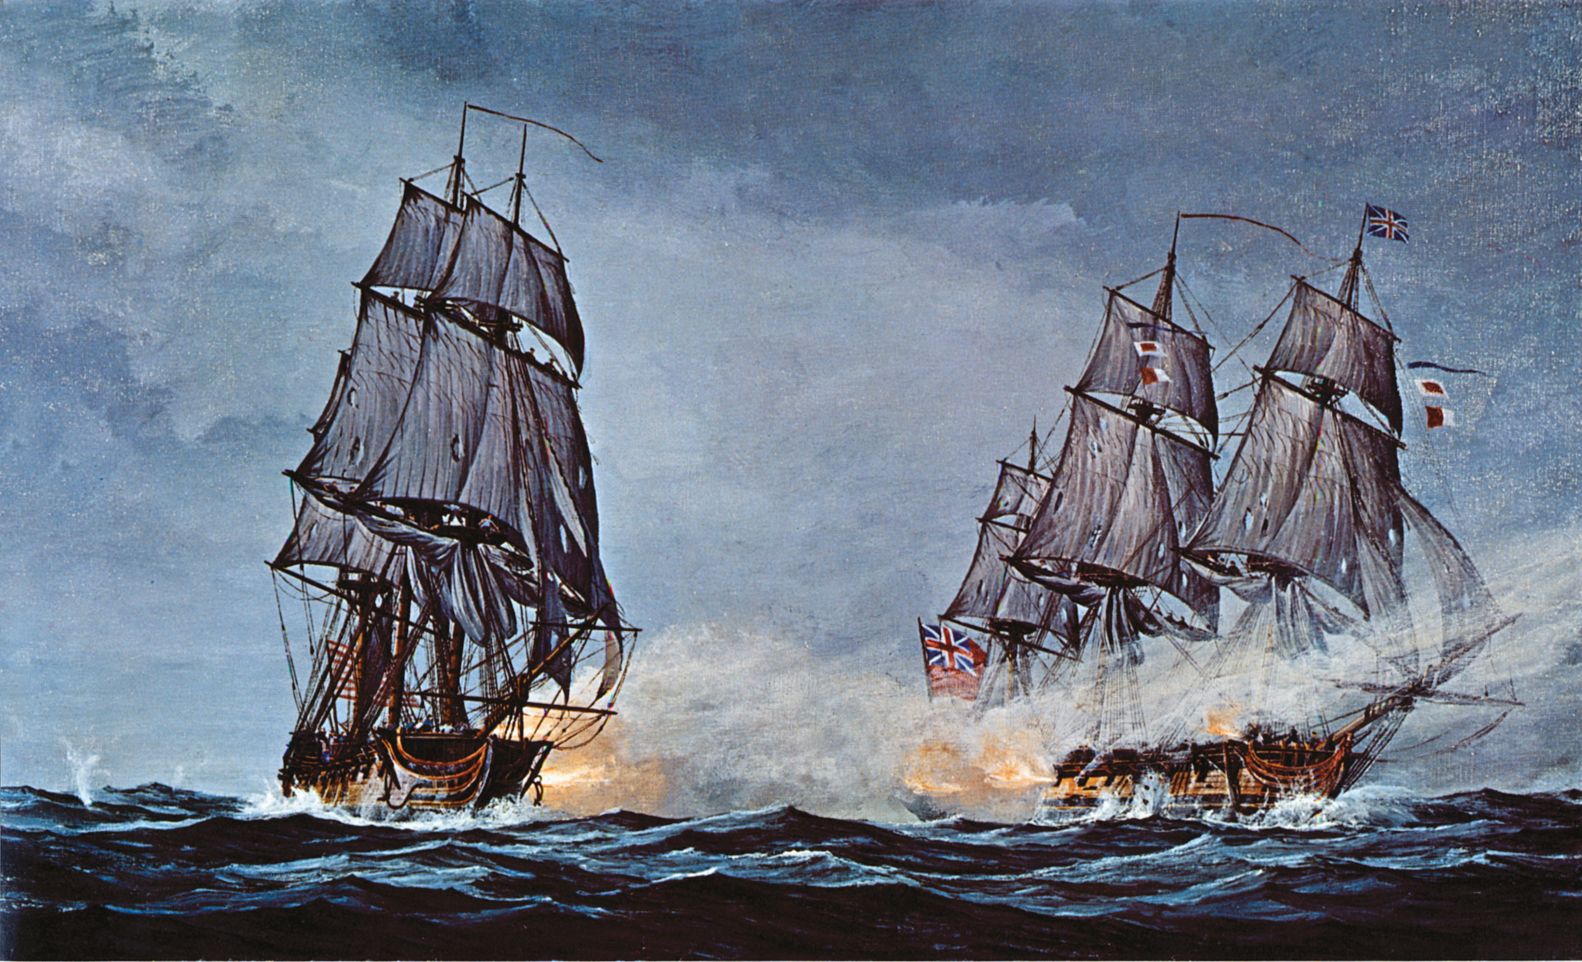 On May 28, 1781, Captain Barry’s ship, Alliance, captured two British ships, HMS Atalanta and HMS Trepassey. 